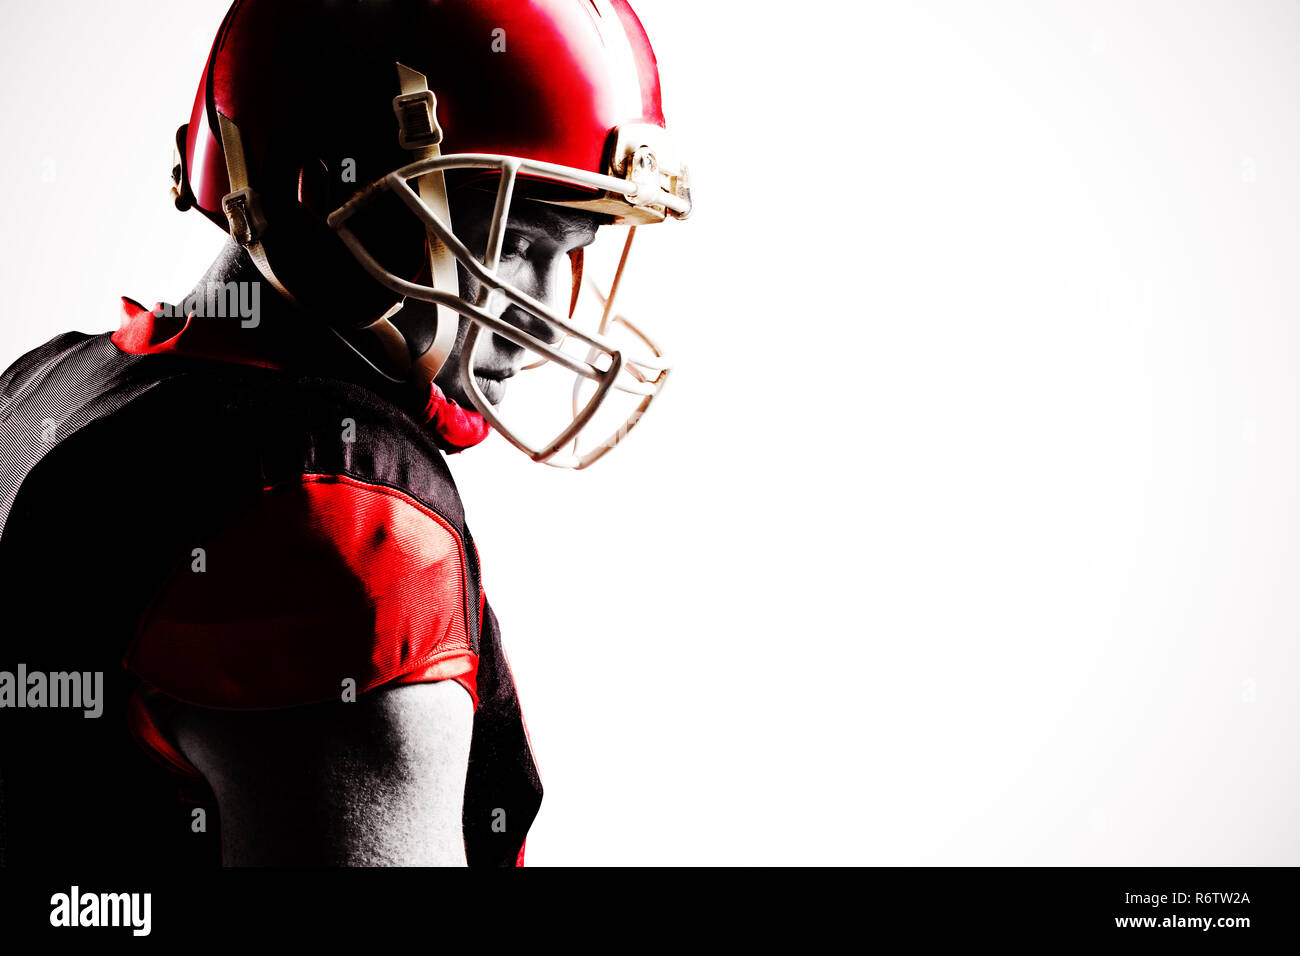 Young American football player standing in helmet Stock Photo